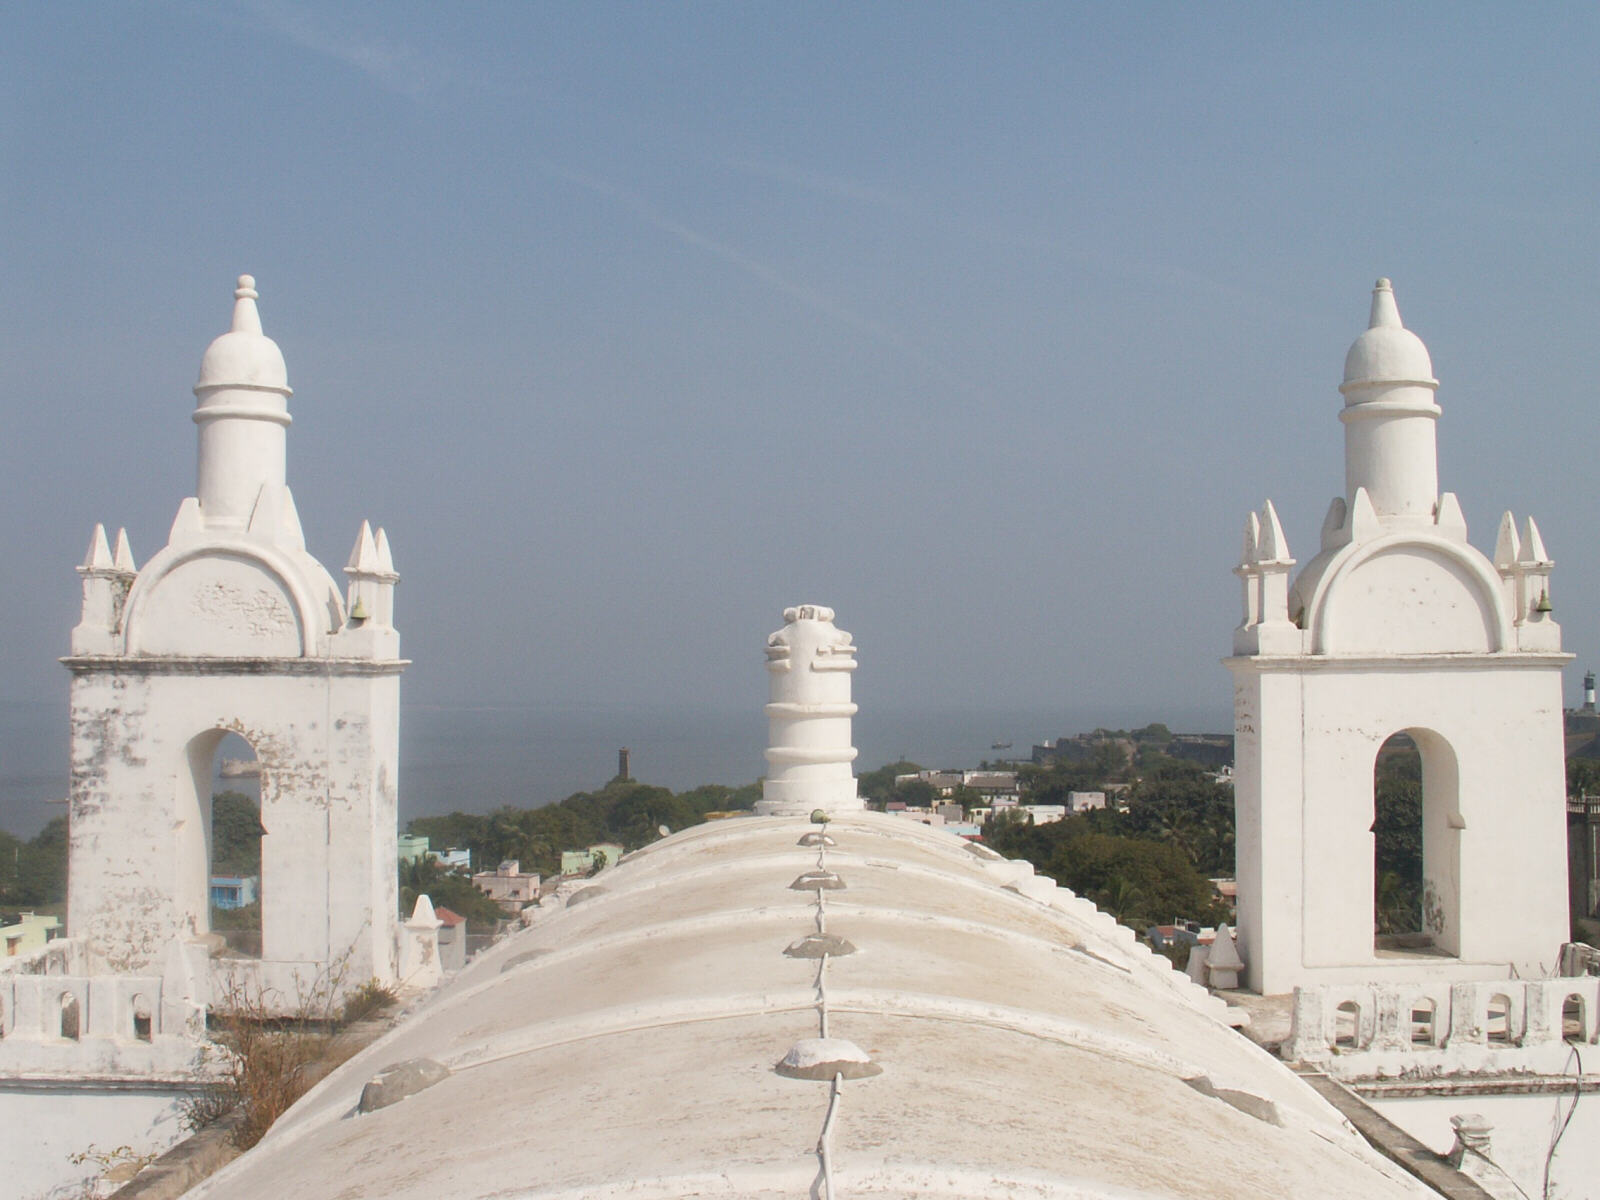 On the roof of St Thomas church in Diu, India